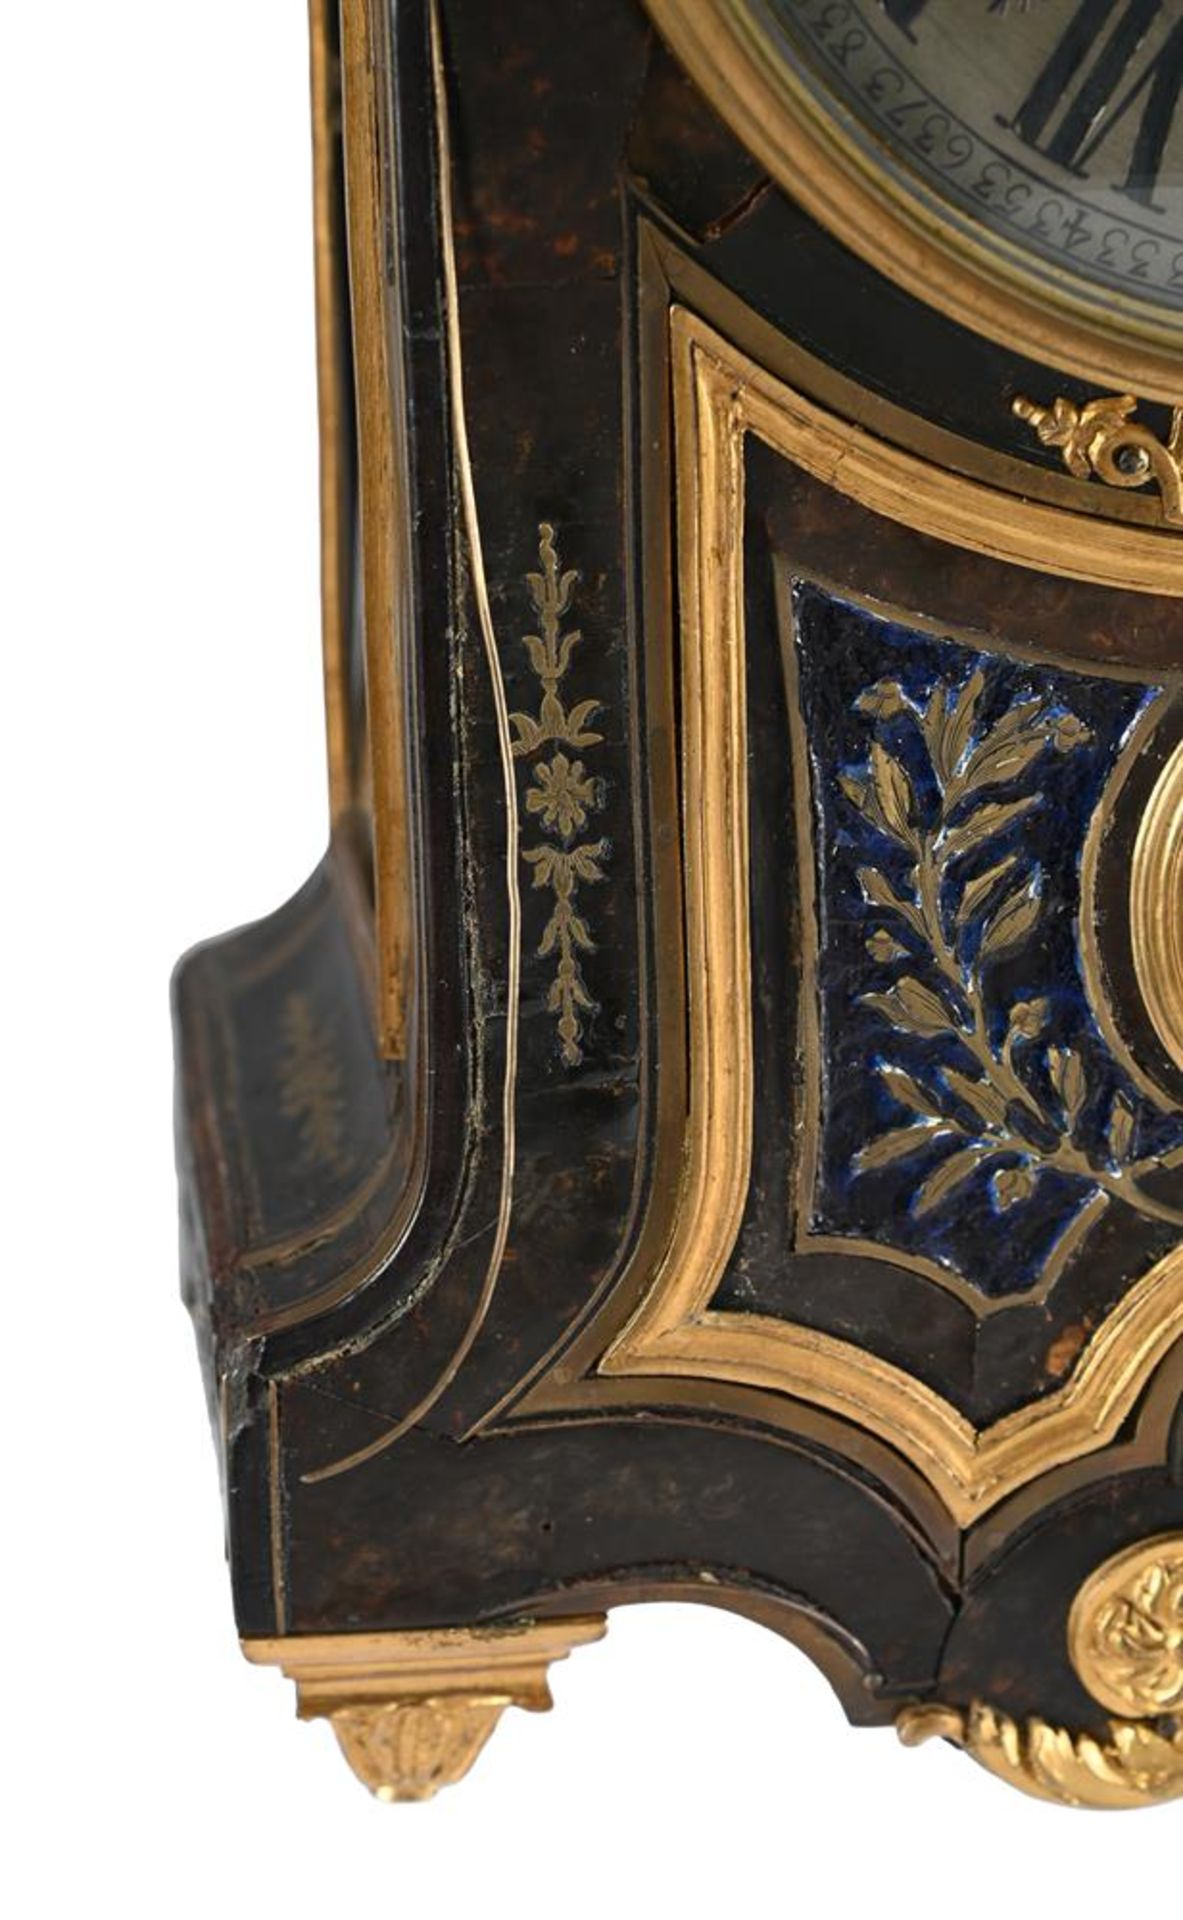 A FRENCH REGENCE BOULLE SMALL BRACKET CLOCK WITH LATER MOVEMENT, EARLY 18TH CENTURY AND LATER - Image 2 of 5